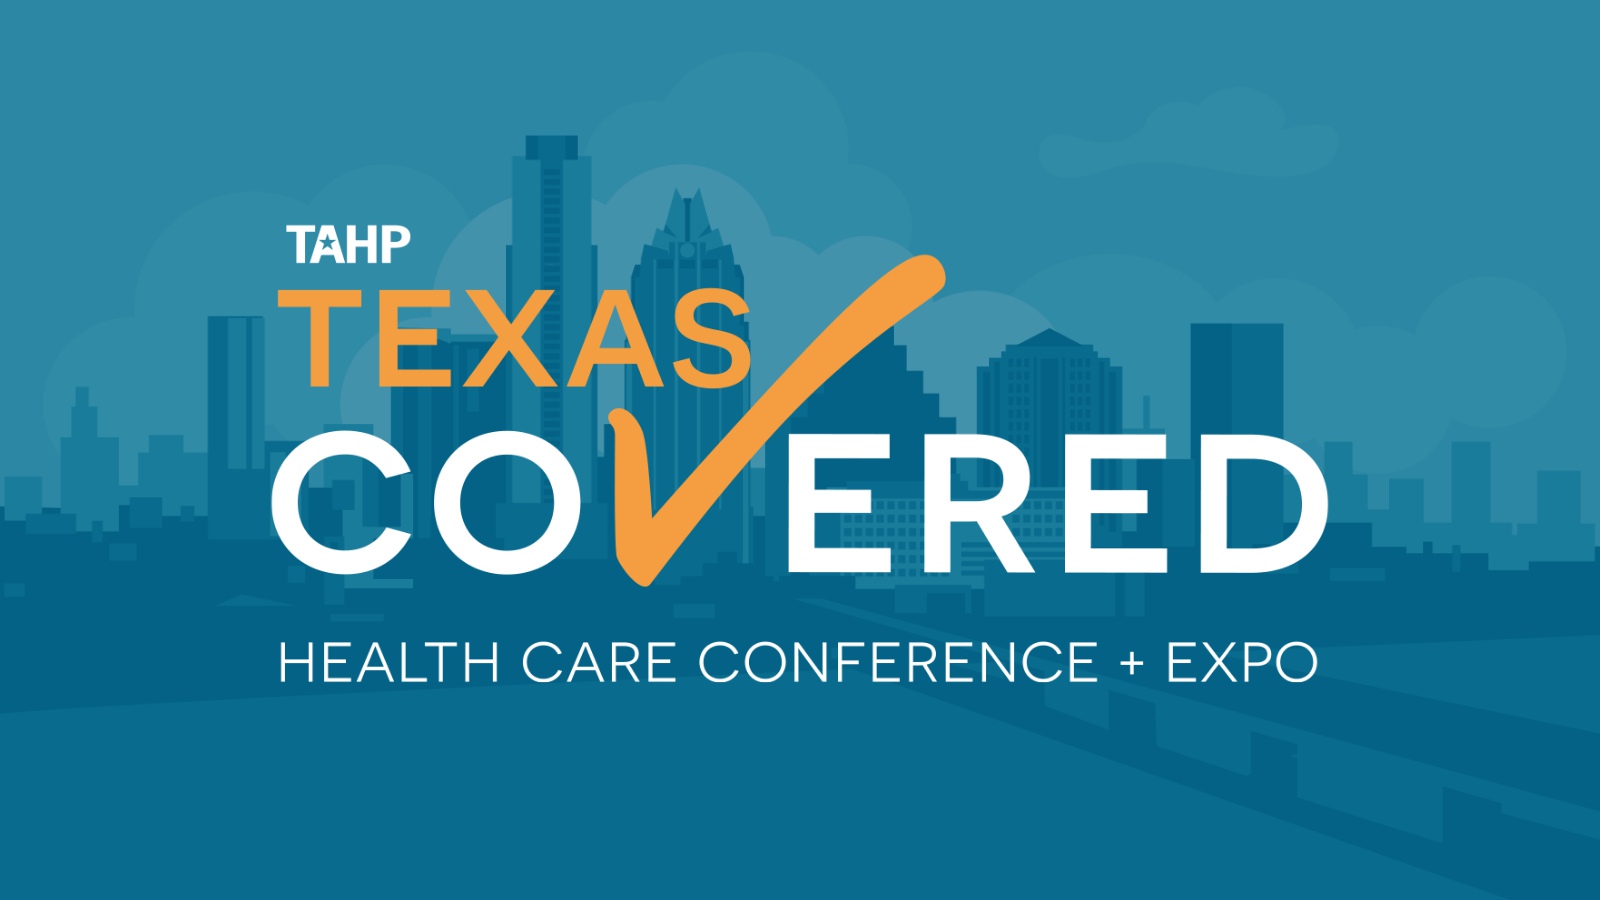 Texas Covered Health Care Conference + Expo